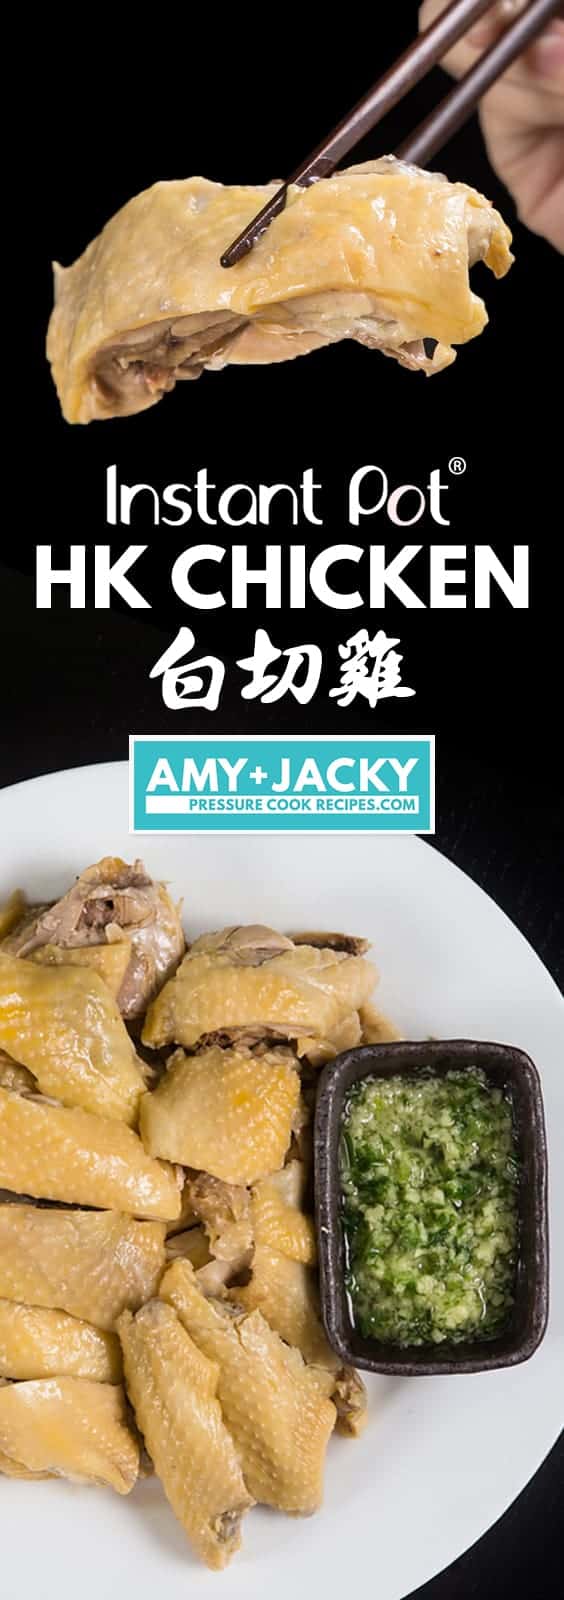 Make Healthy Instant Pot HK Chicken Recipe 白切雞 (Pressure Cooker Chicken) in 3 easy steps. This Classic Cantonese Poached Whole Chicken (White Cut Chicken) with Ginger Scallion Sauce is super easy to cook with 5 real, whole food ingredients in an hour! #instantpot #instantpotrecipes #pressurecooker #pressurecookerrecipes #chickenrecipes #wholechicken #chineserecipes